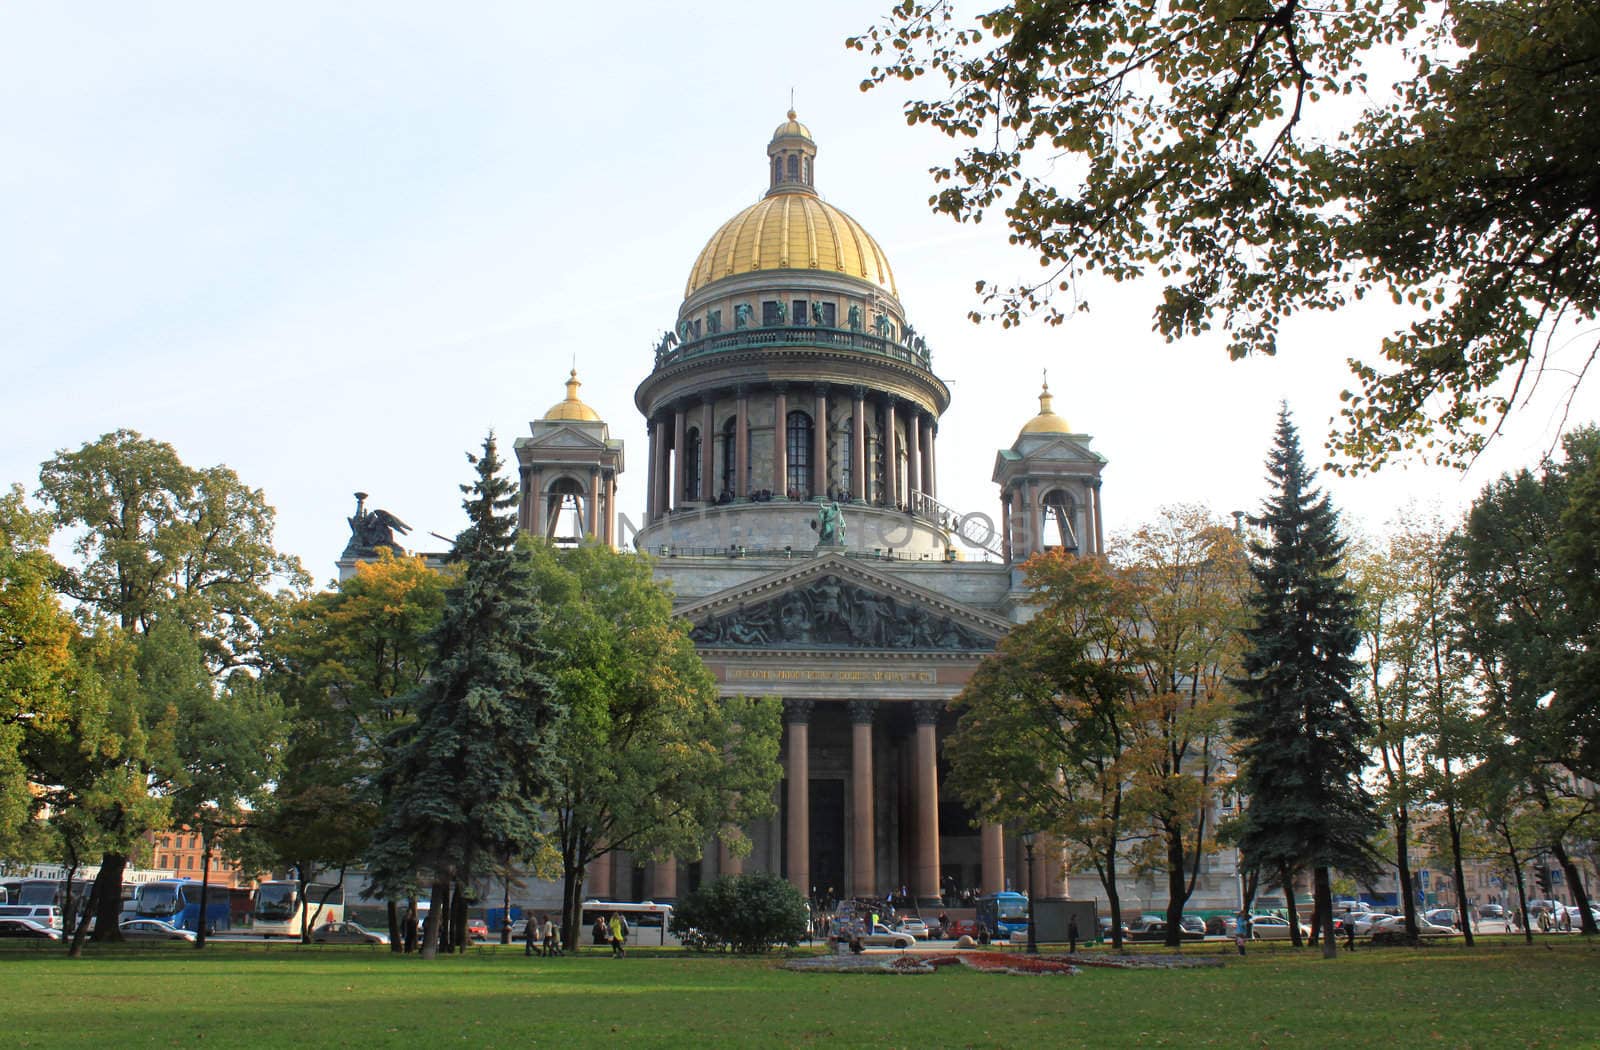 Cathedral of st. Isaak , St. Petersburg, Russia with trees in the foreground.